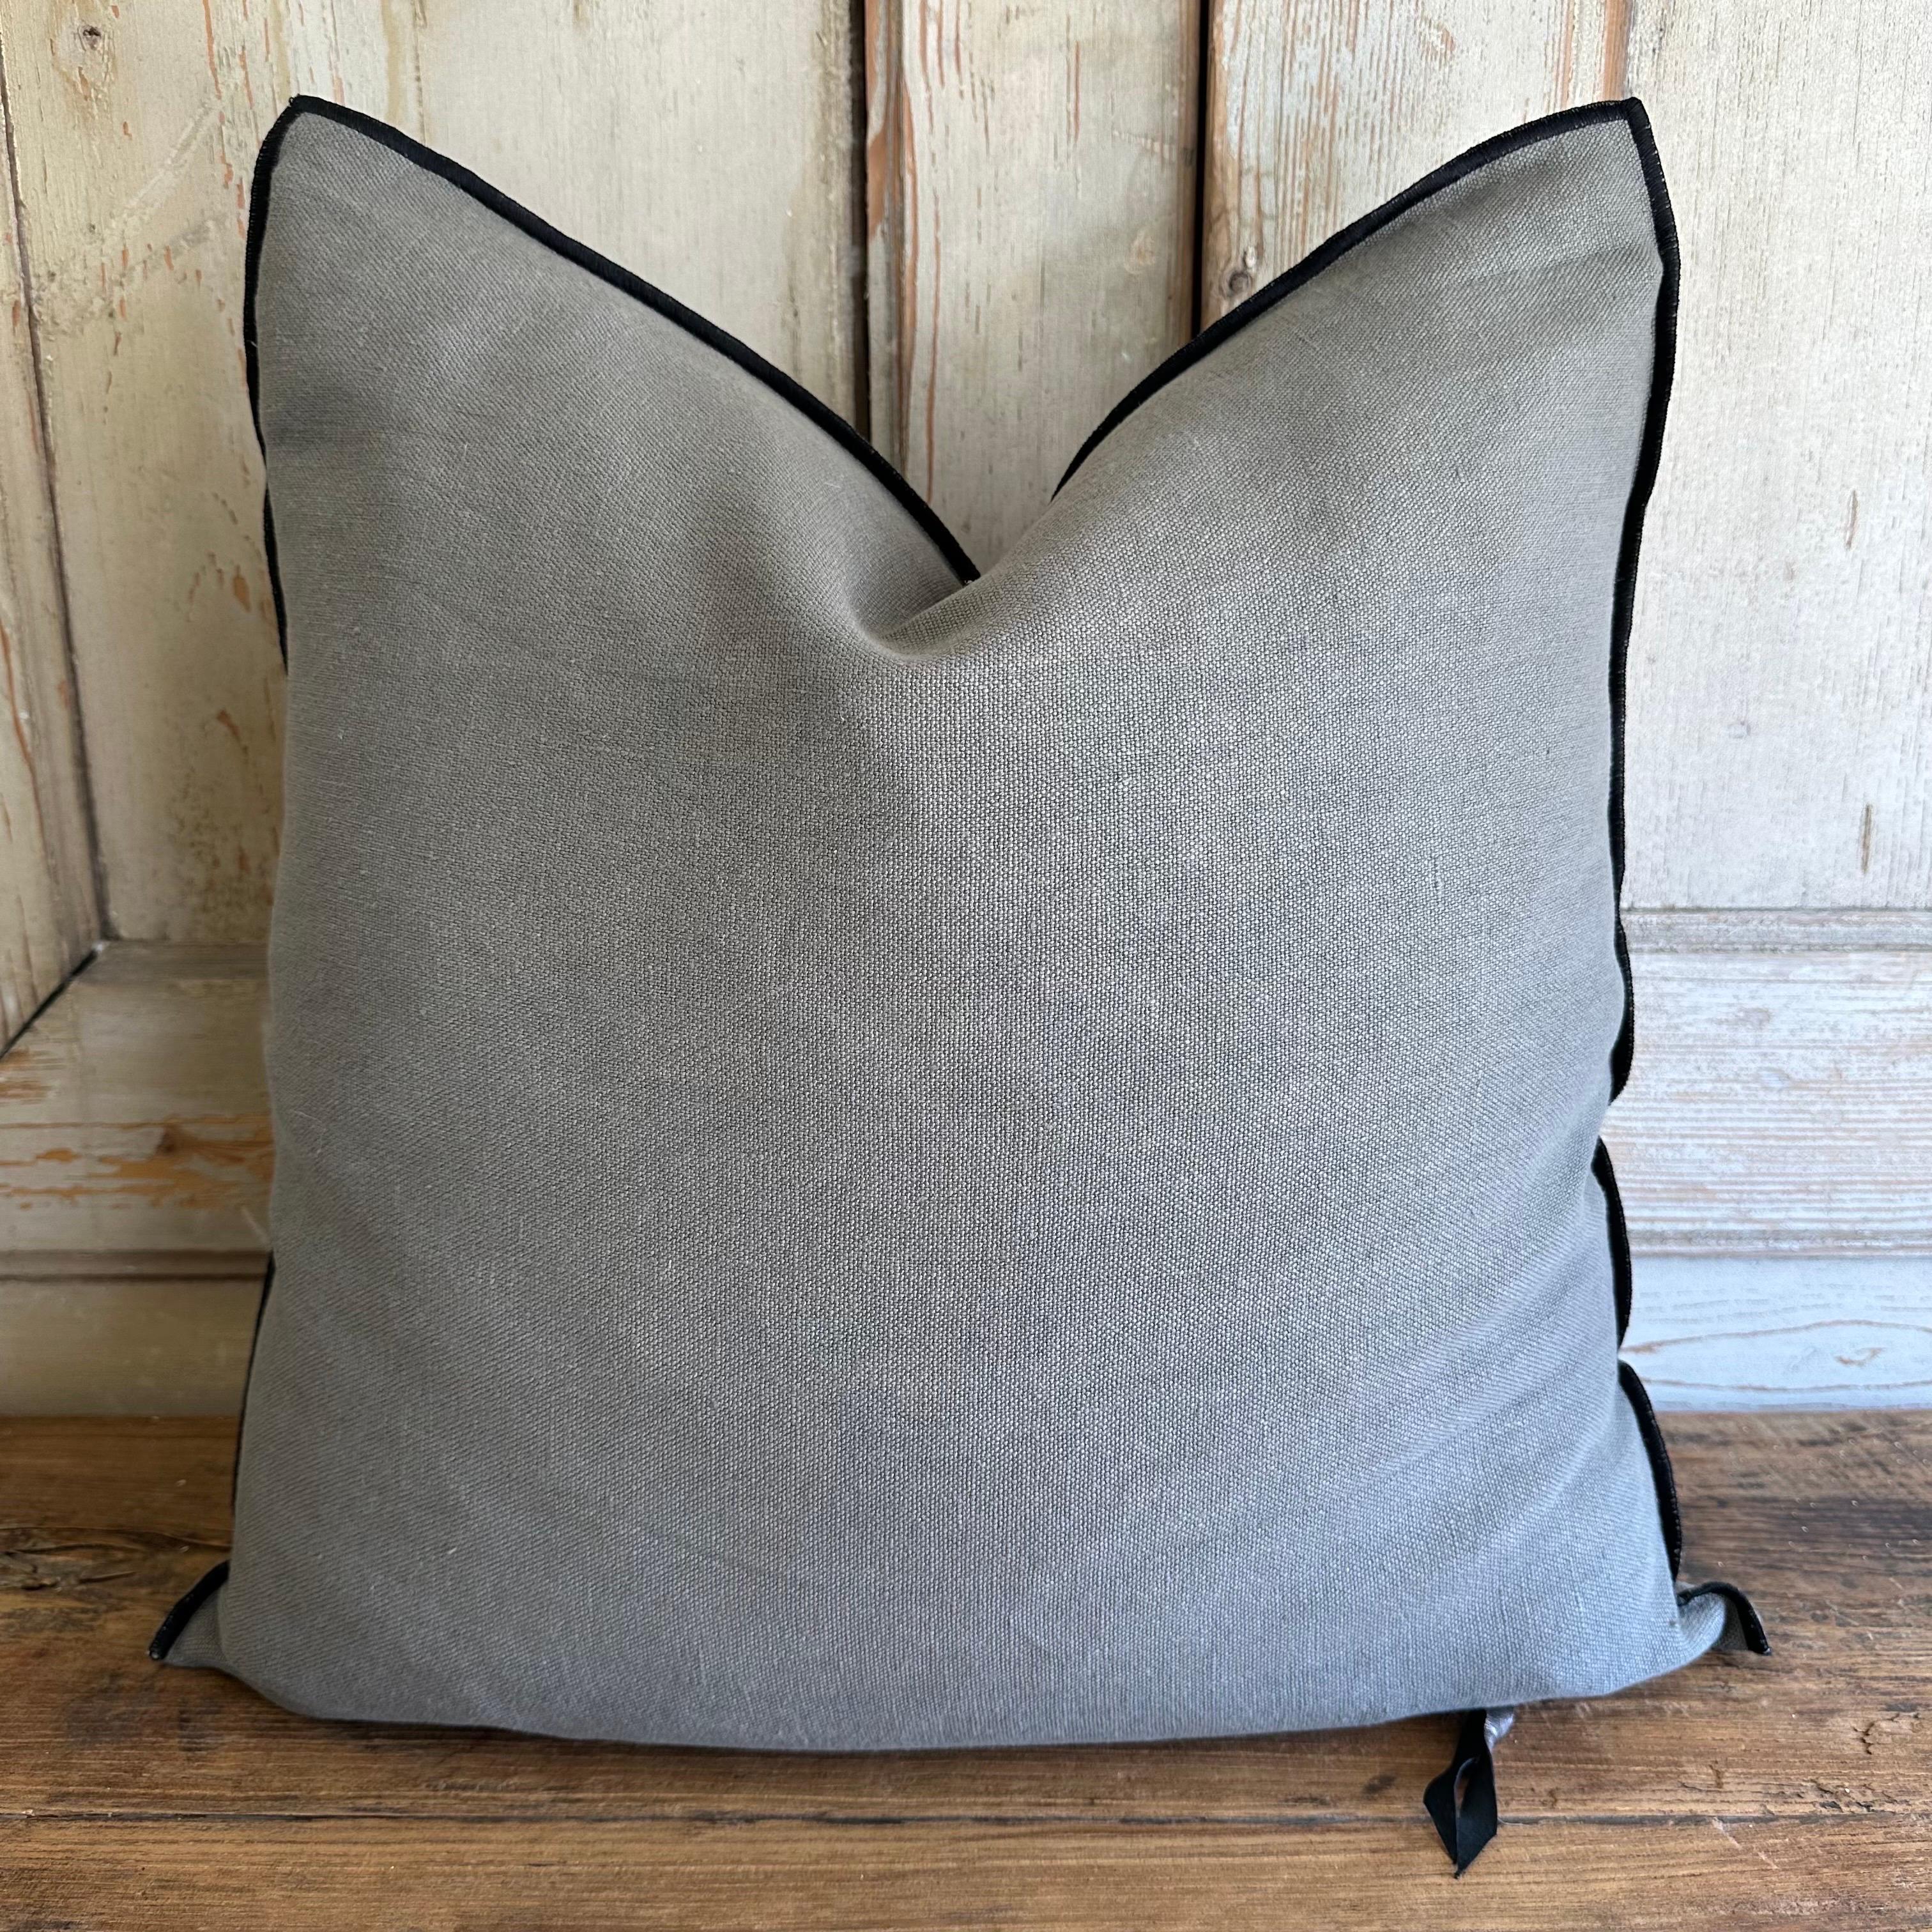 Custom linen blend accent pillow.
Color: elephant / a moody med. grey colored nubby textured style pillow with a stitched edge, metal zipper closure. 
Our pillows are constructed with vintage one of a kind textiles from around the globe. Carefully